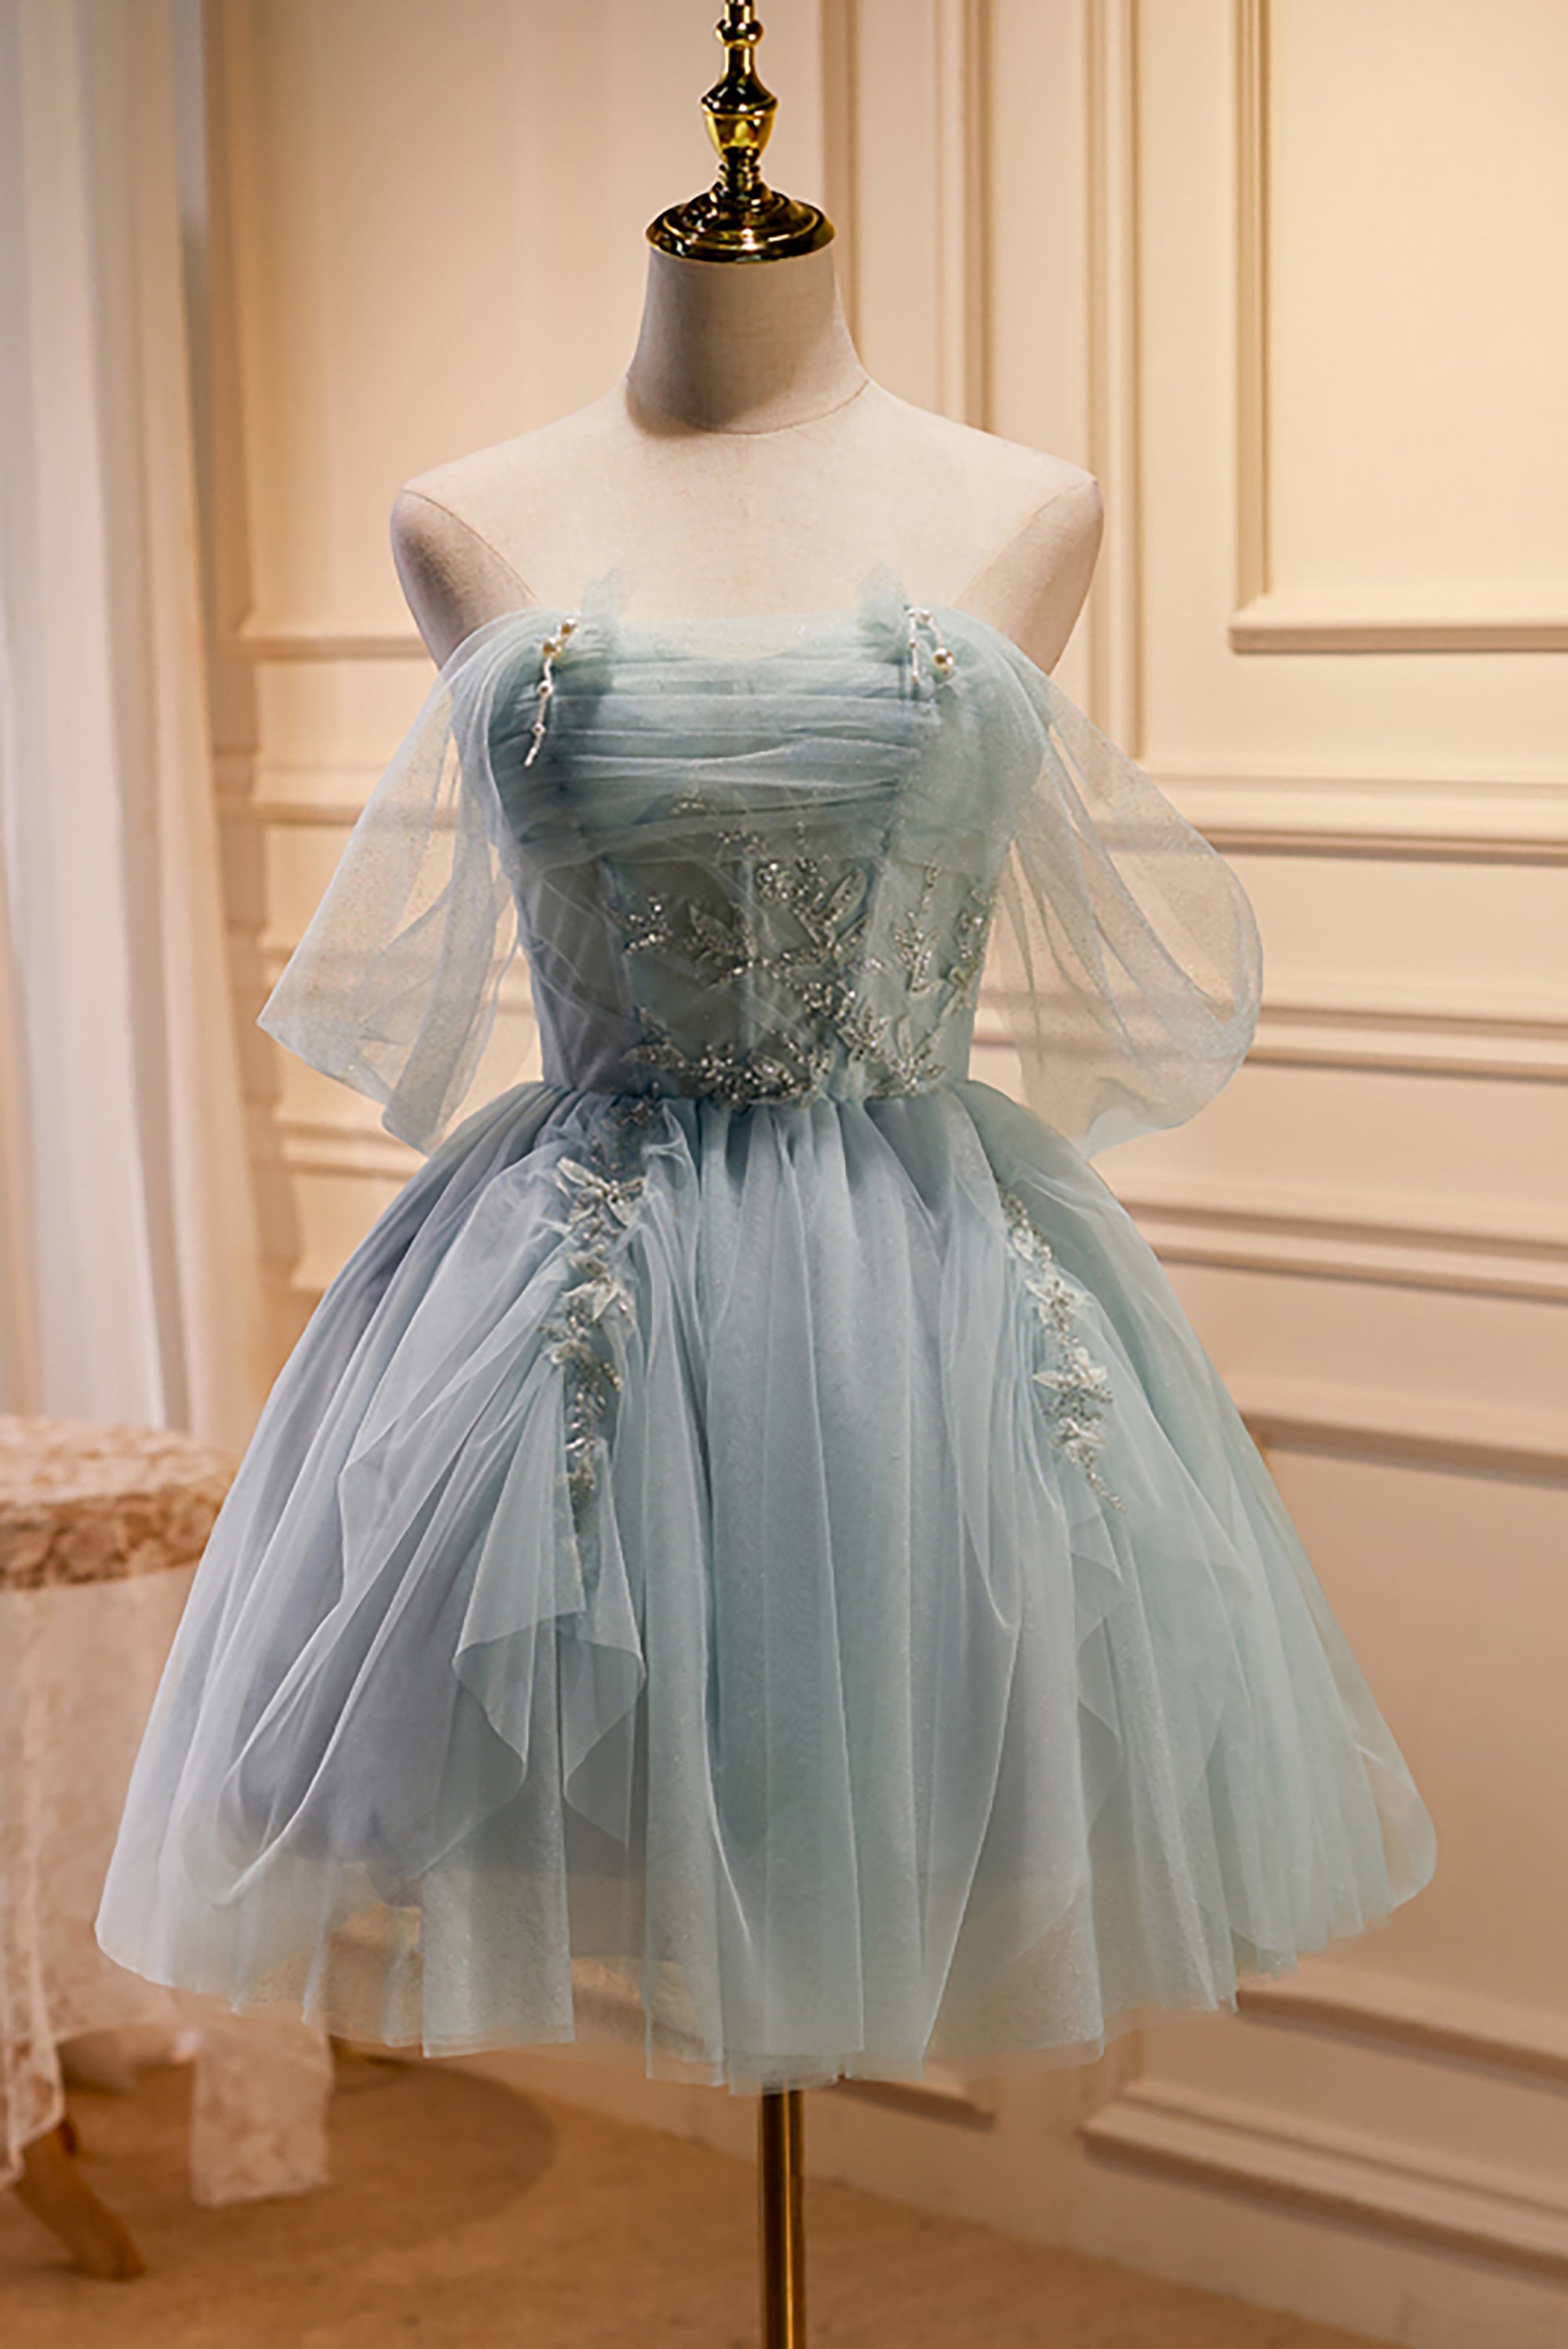 Charming Blue Off The Shoulder A Line Tulle Short Corset Homecoming Dresses outfit, Bridesmaids Dresses Blush